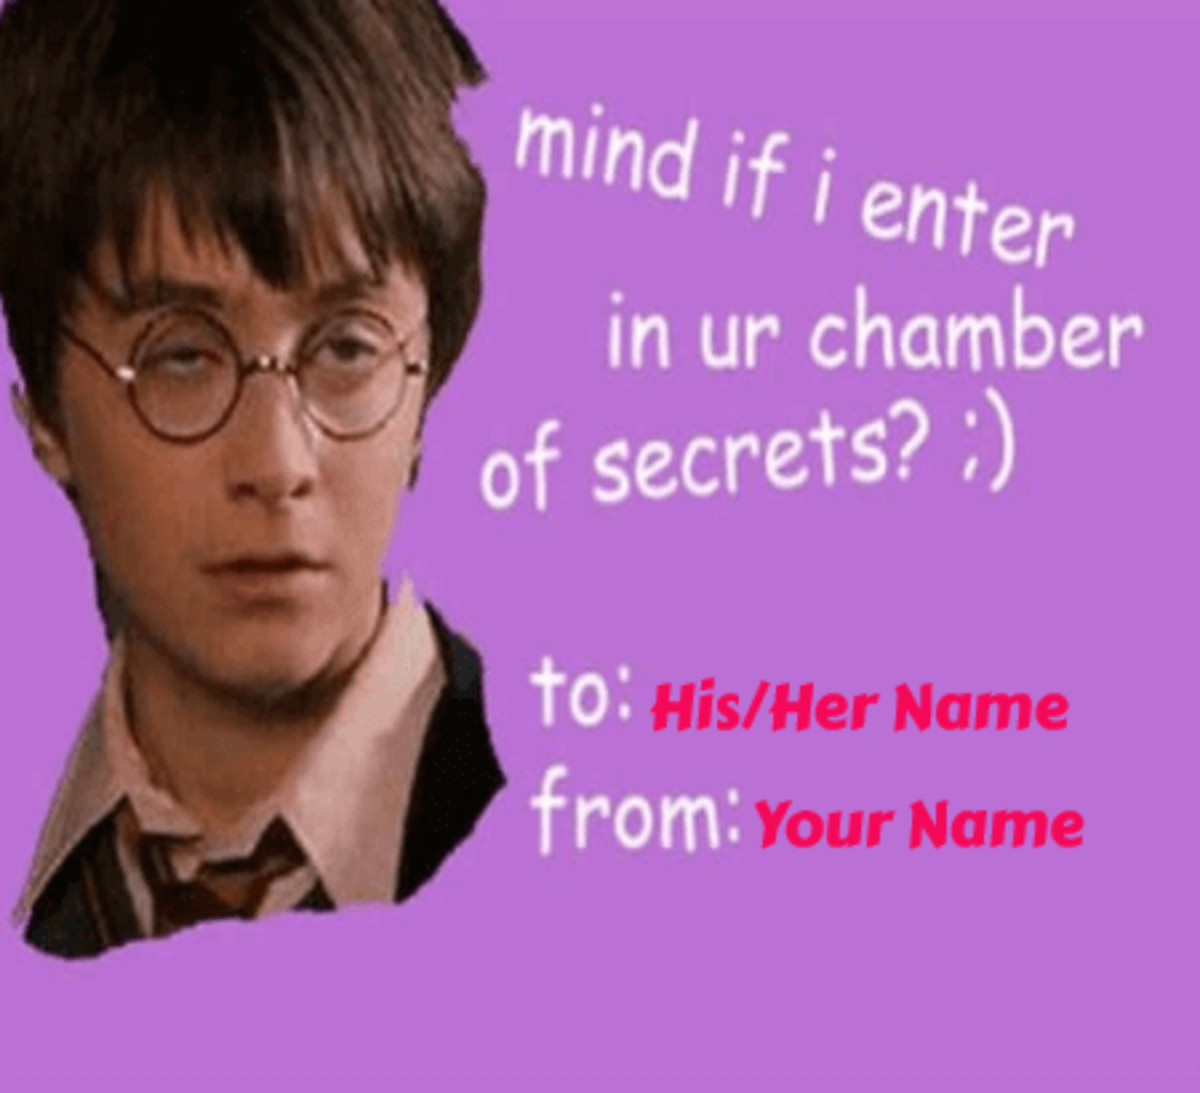 Dirty Valentines Day Meme Cards Meme Valentines Card Wishes.